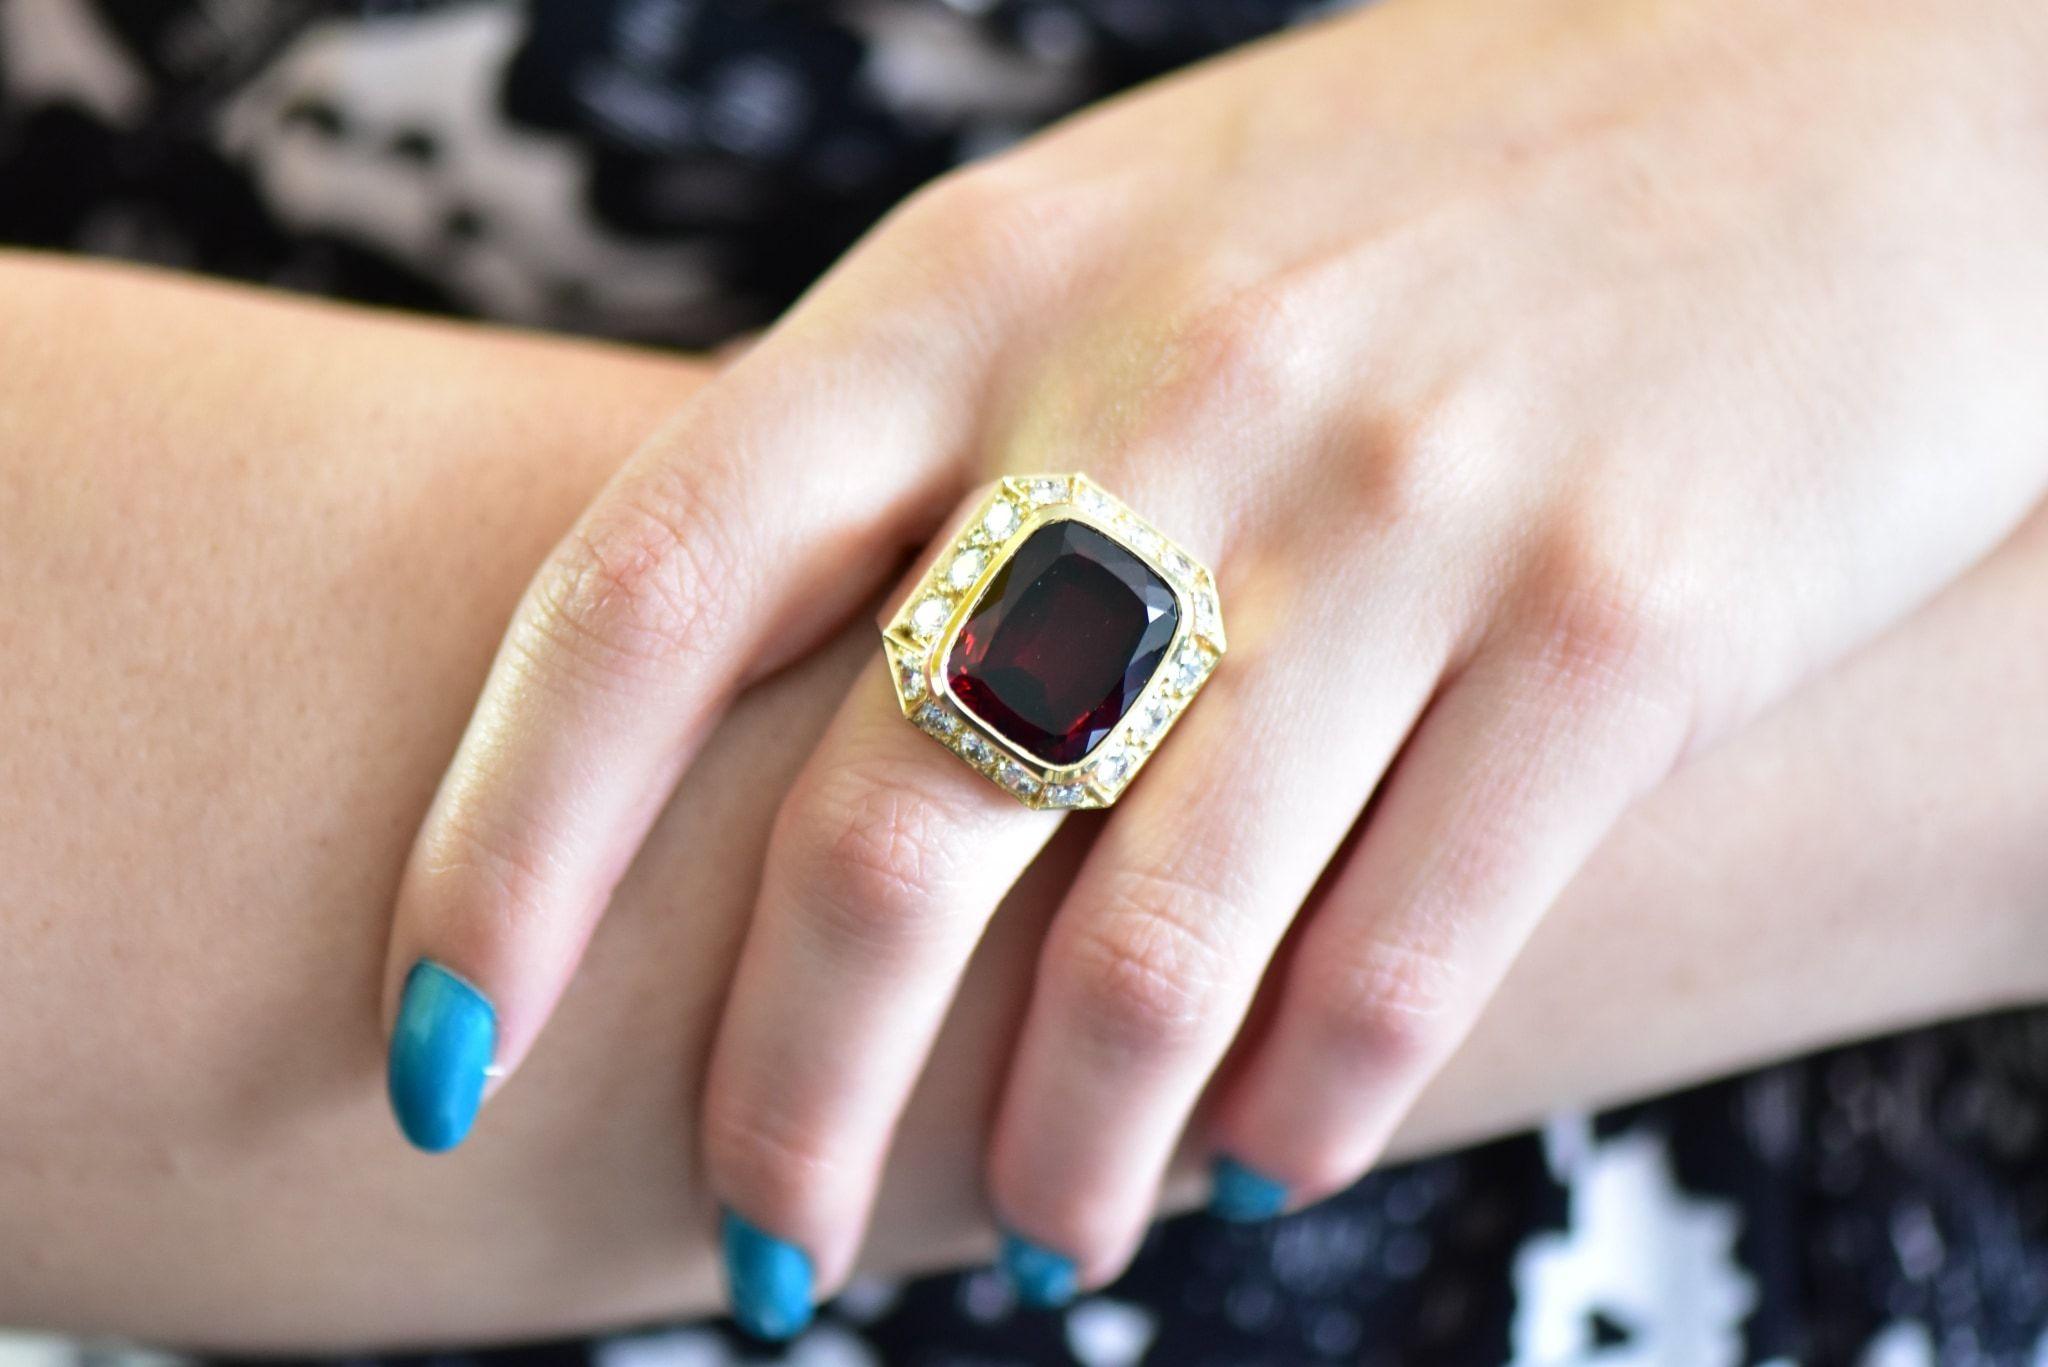 Centering a rectangular cushion cut garnet weighing approximately 18.20 carats, deep intoxicating red color

With a round brilliant cut diamond surround, weighing approximately 2.25 carats total, G color and VS to SI clarity

Vintage design

Ring